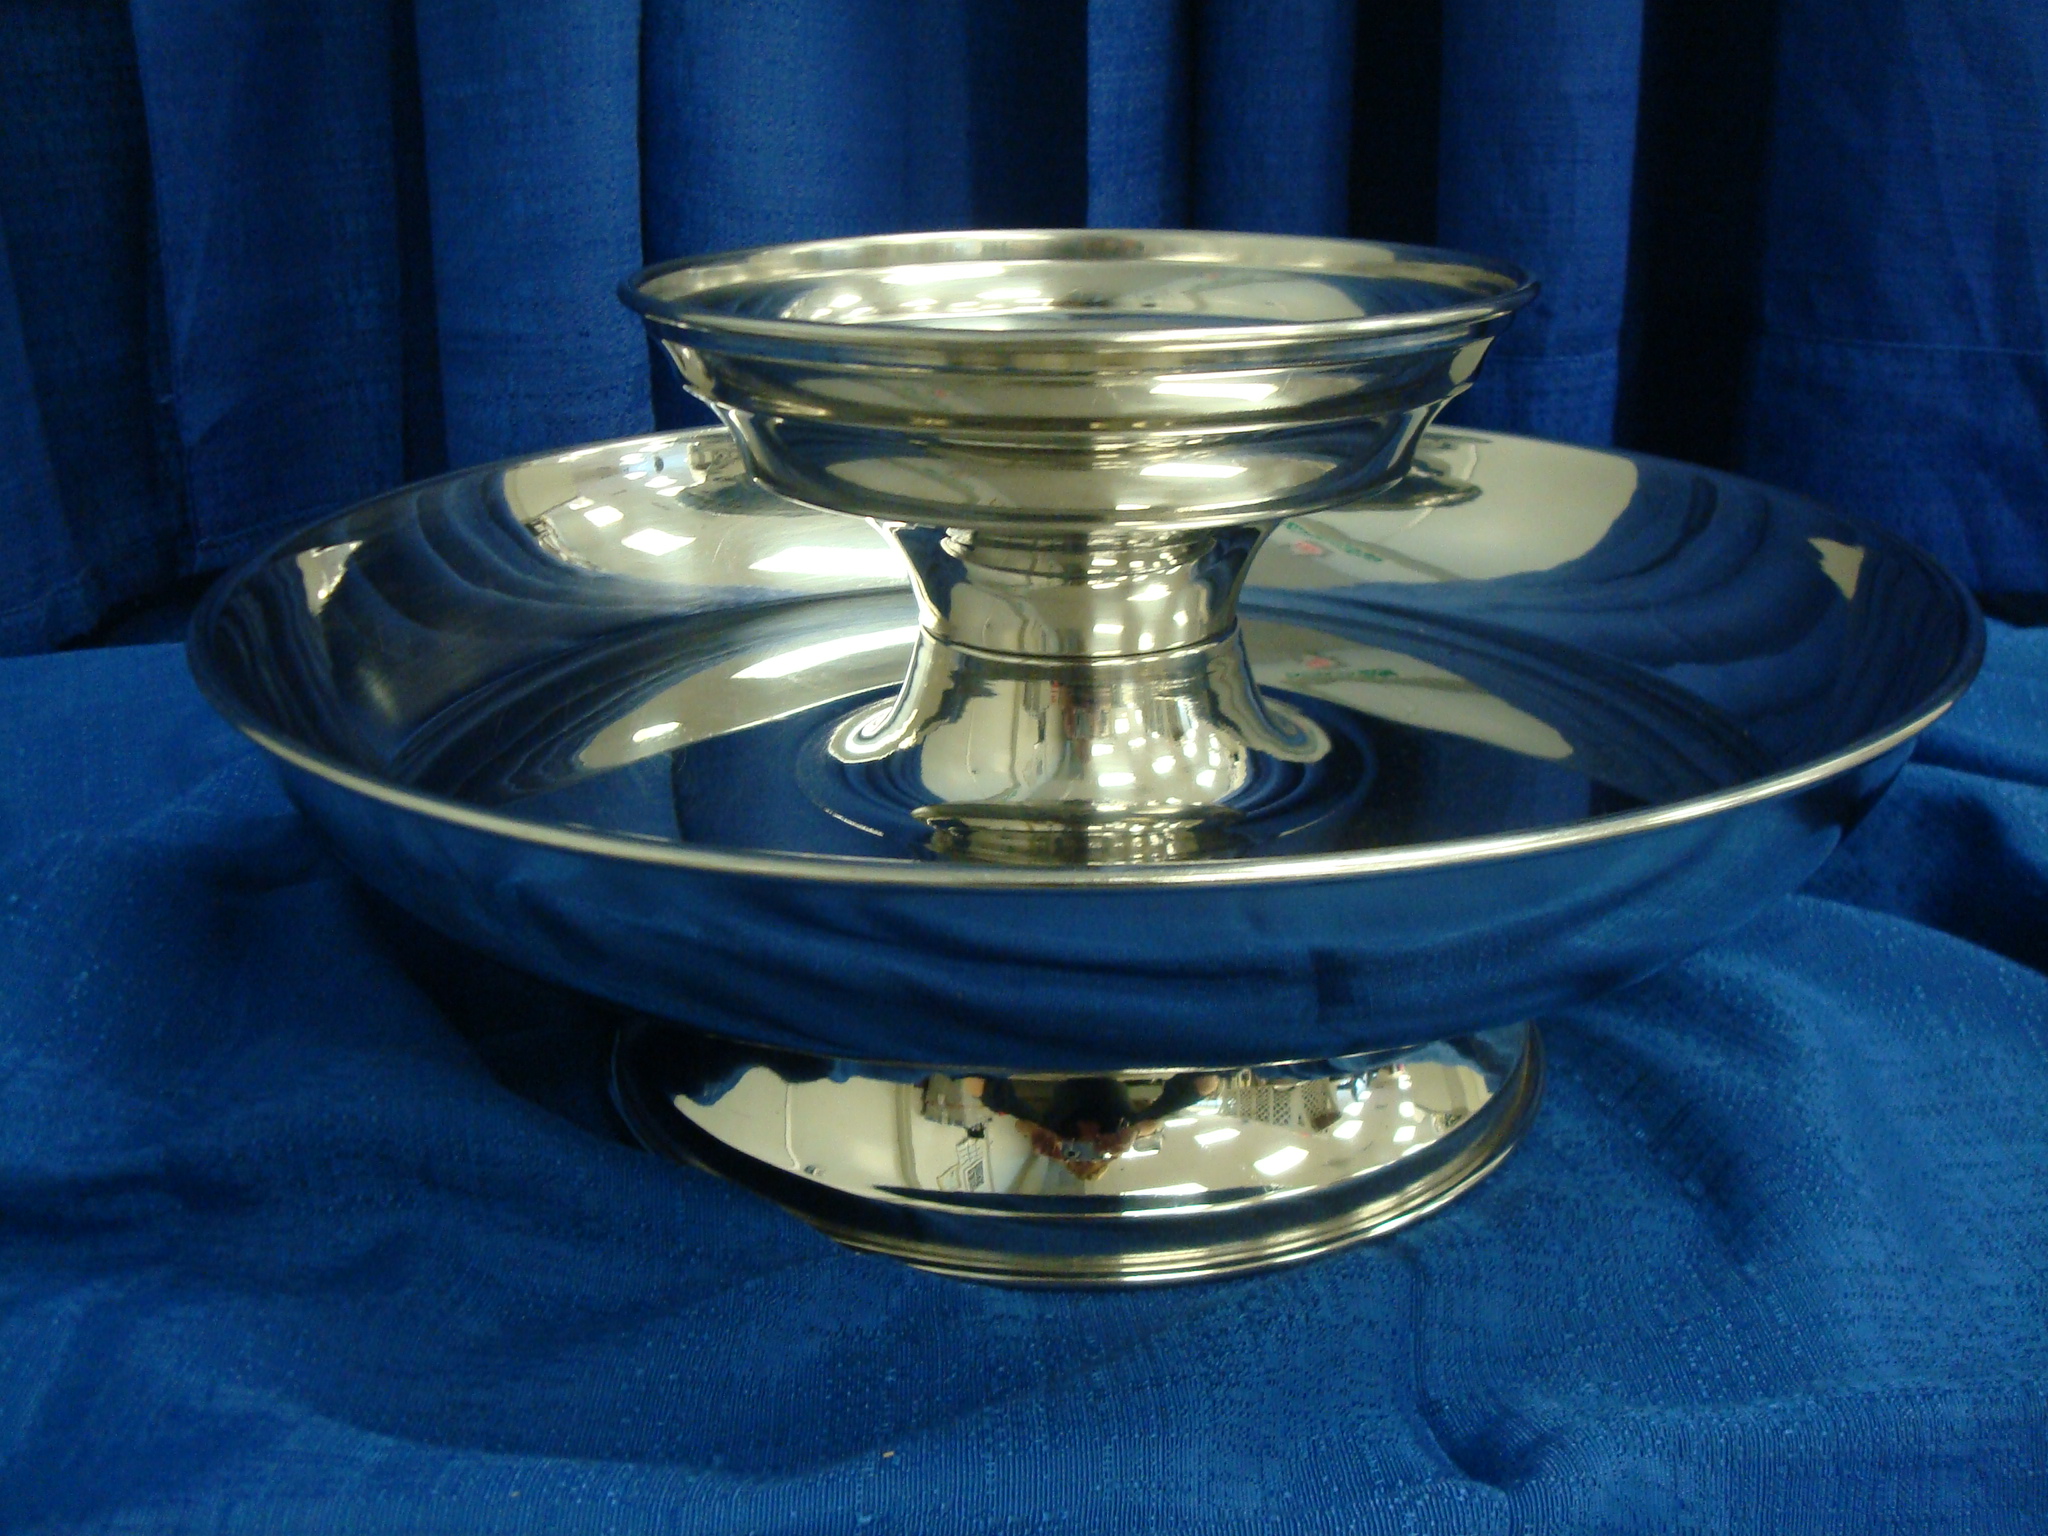 Serving Bowl - 2 Tier Stainless